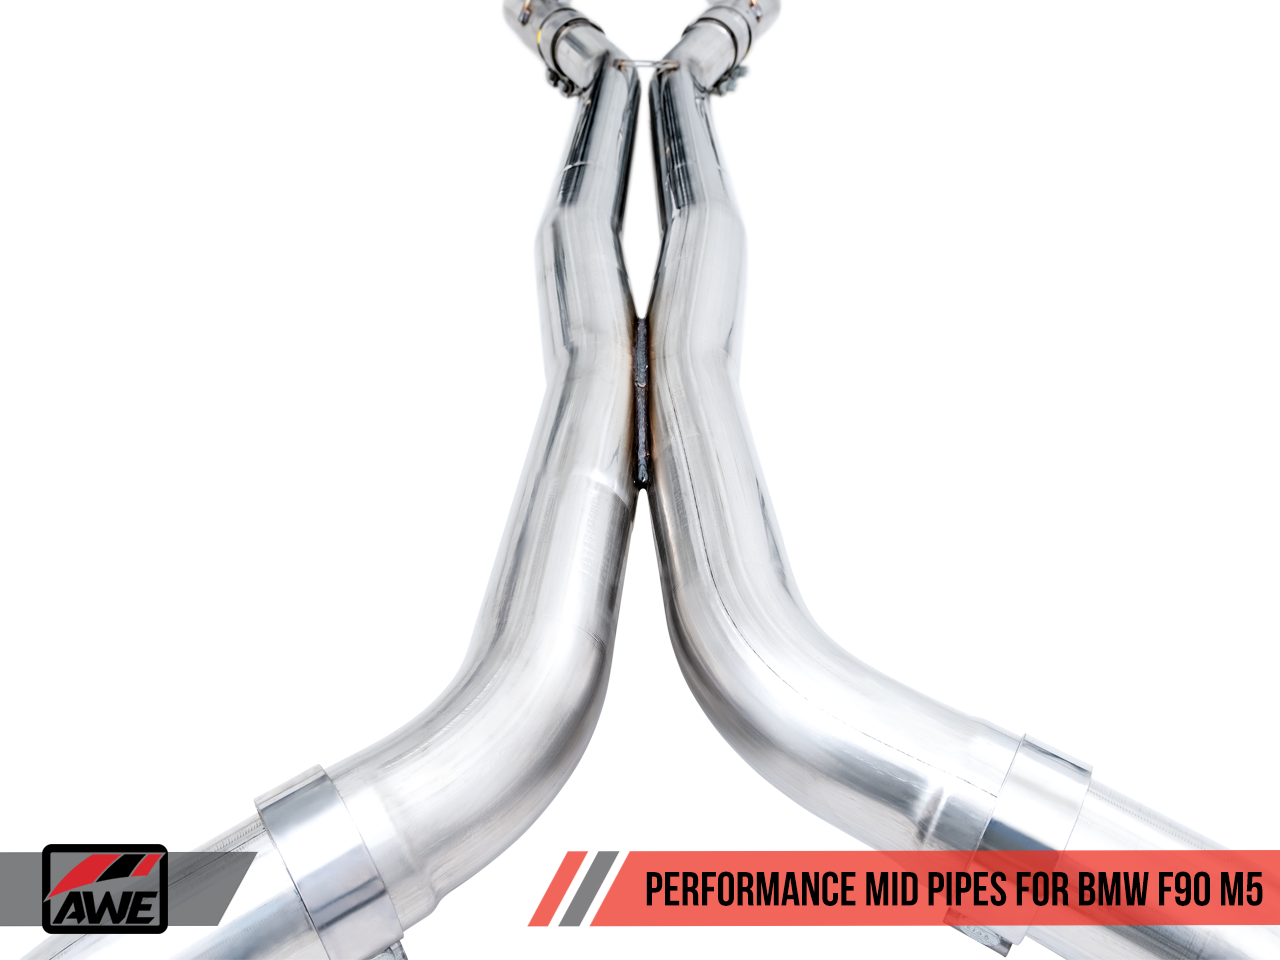 AWE Performance Mid Pipes for BMW F90 M5 - 0